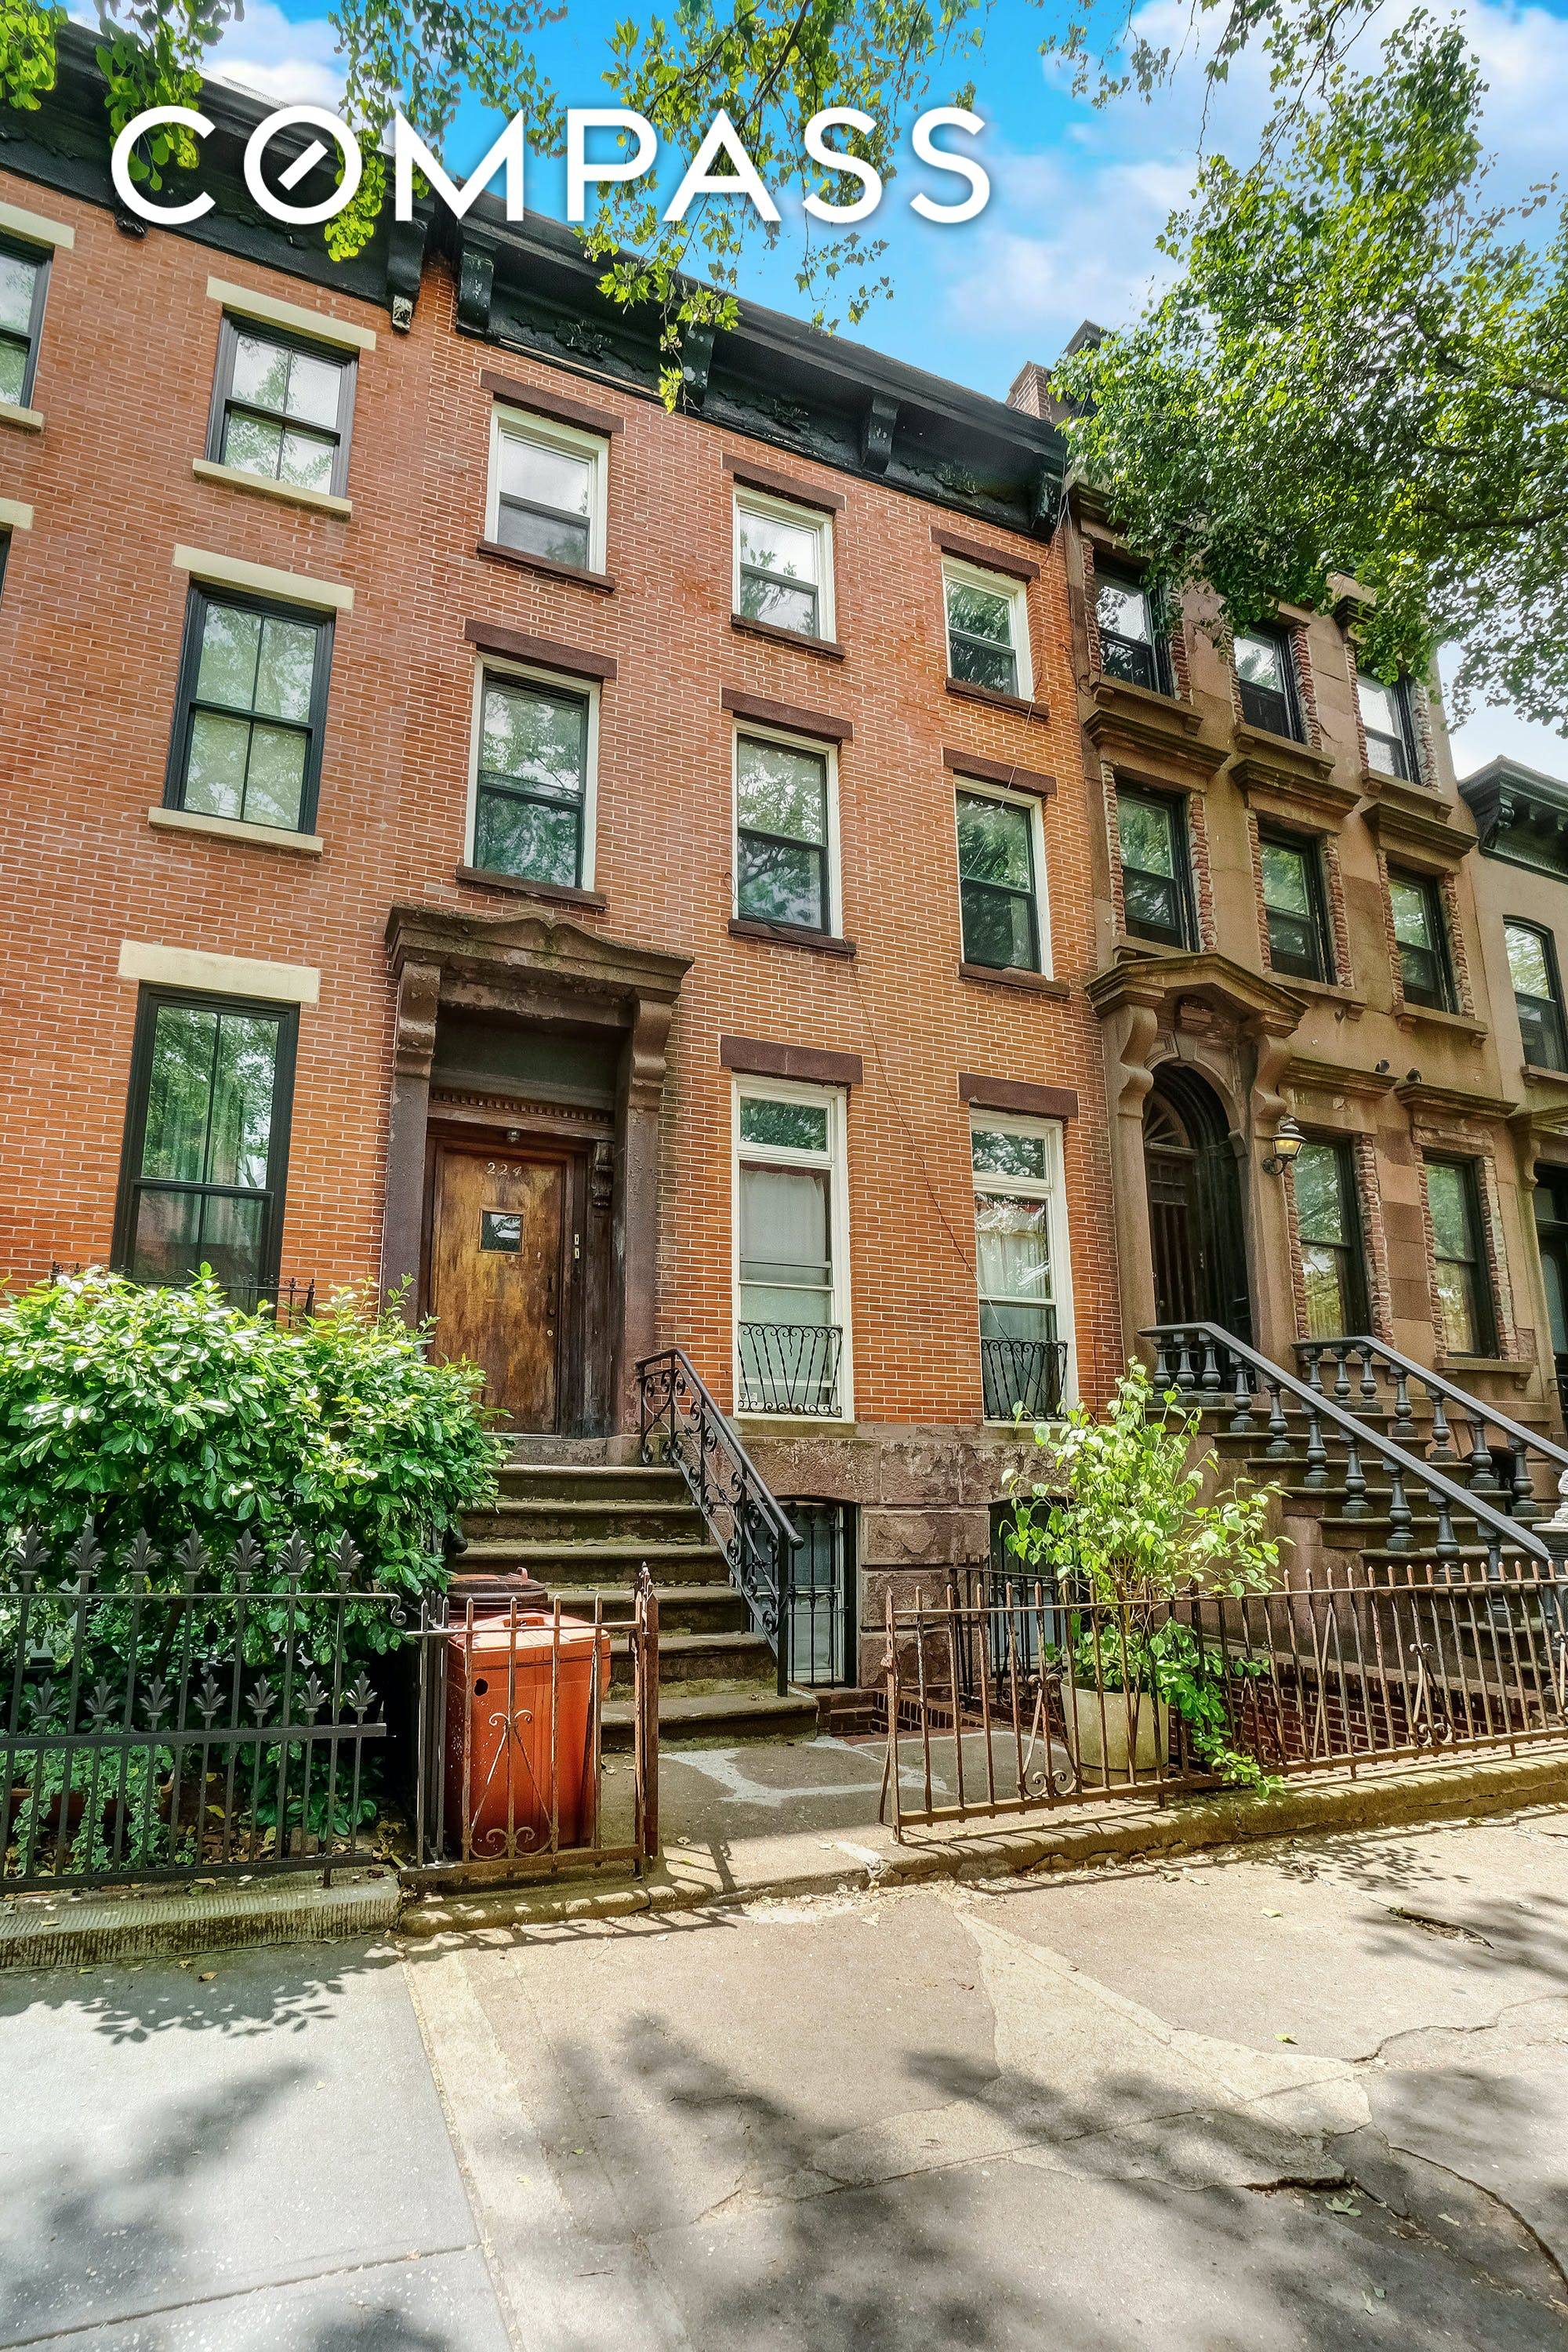 Welcome to 224 Bergen Street, this four story brick townhouse is superbly located on Bergen Street between Nevins and Bond in the heart of the Boerum Hill historic district.